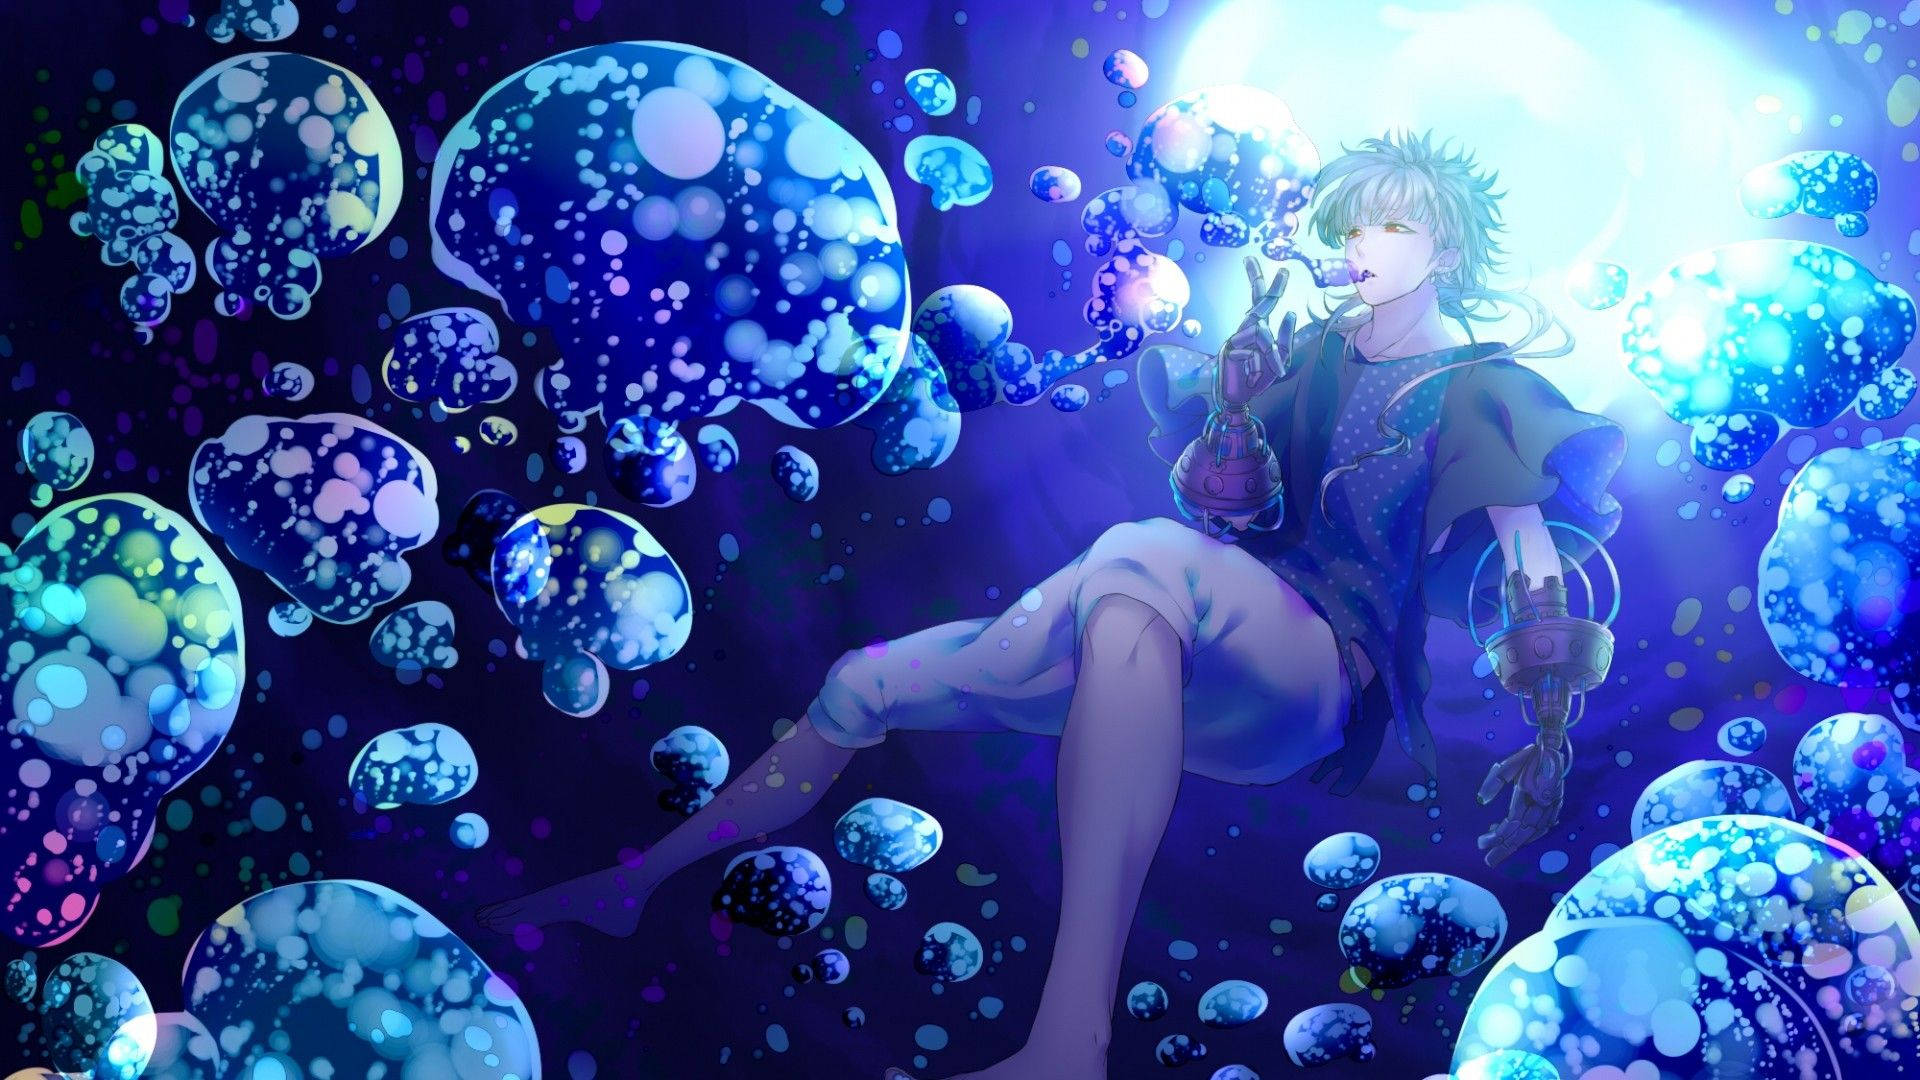 Anime Blue Boy Dipping Under The Sea Wallpaper